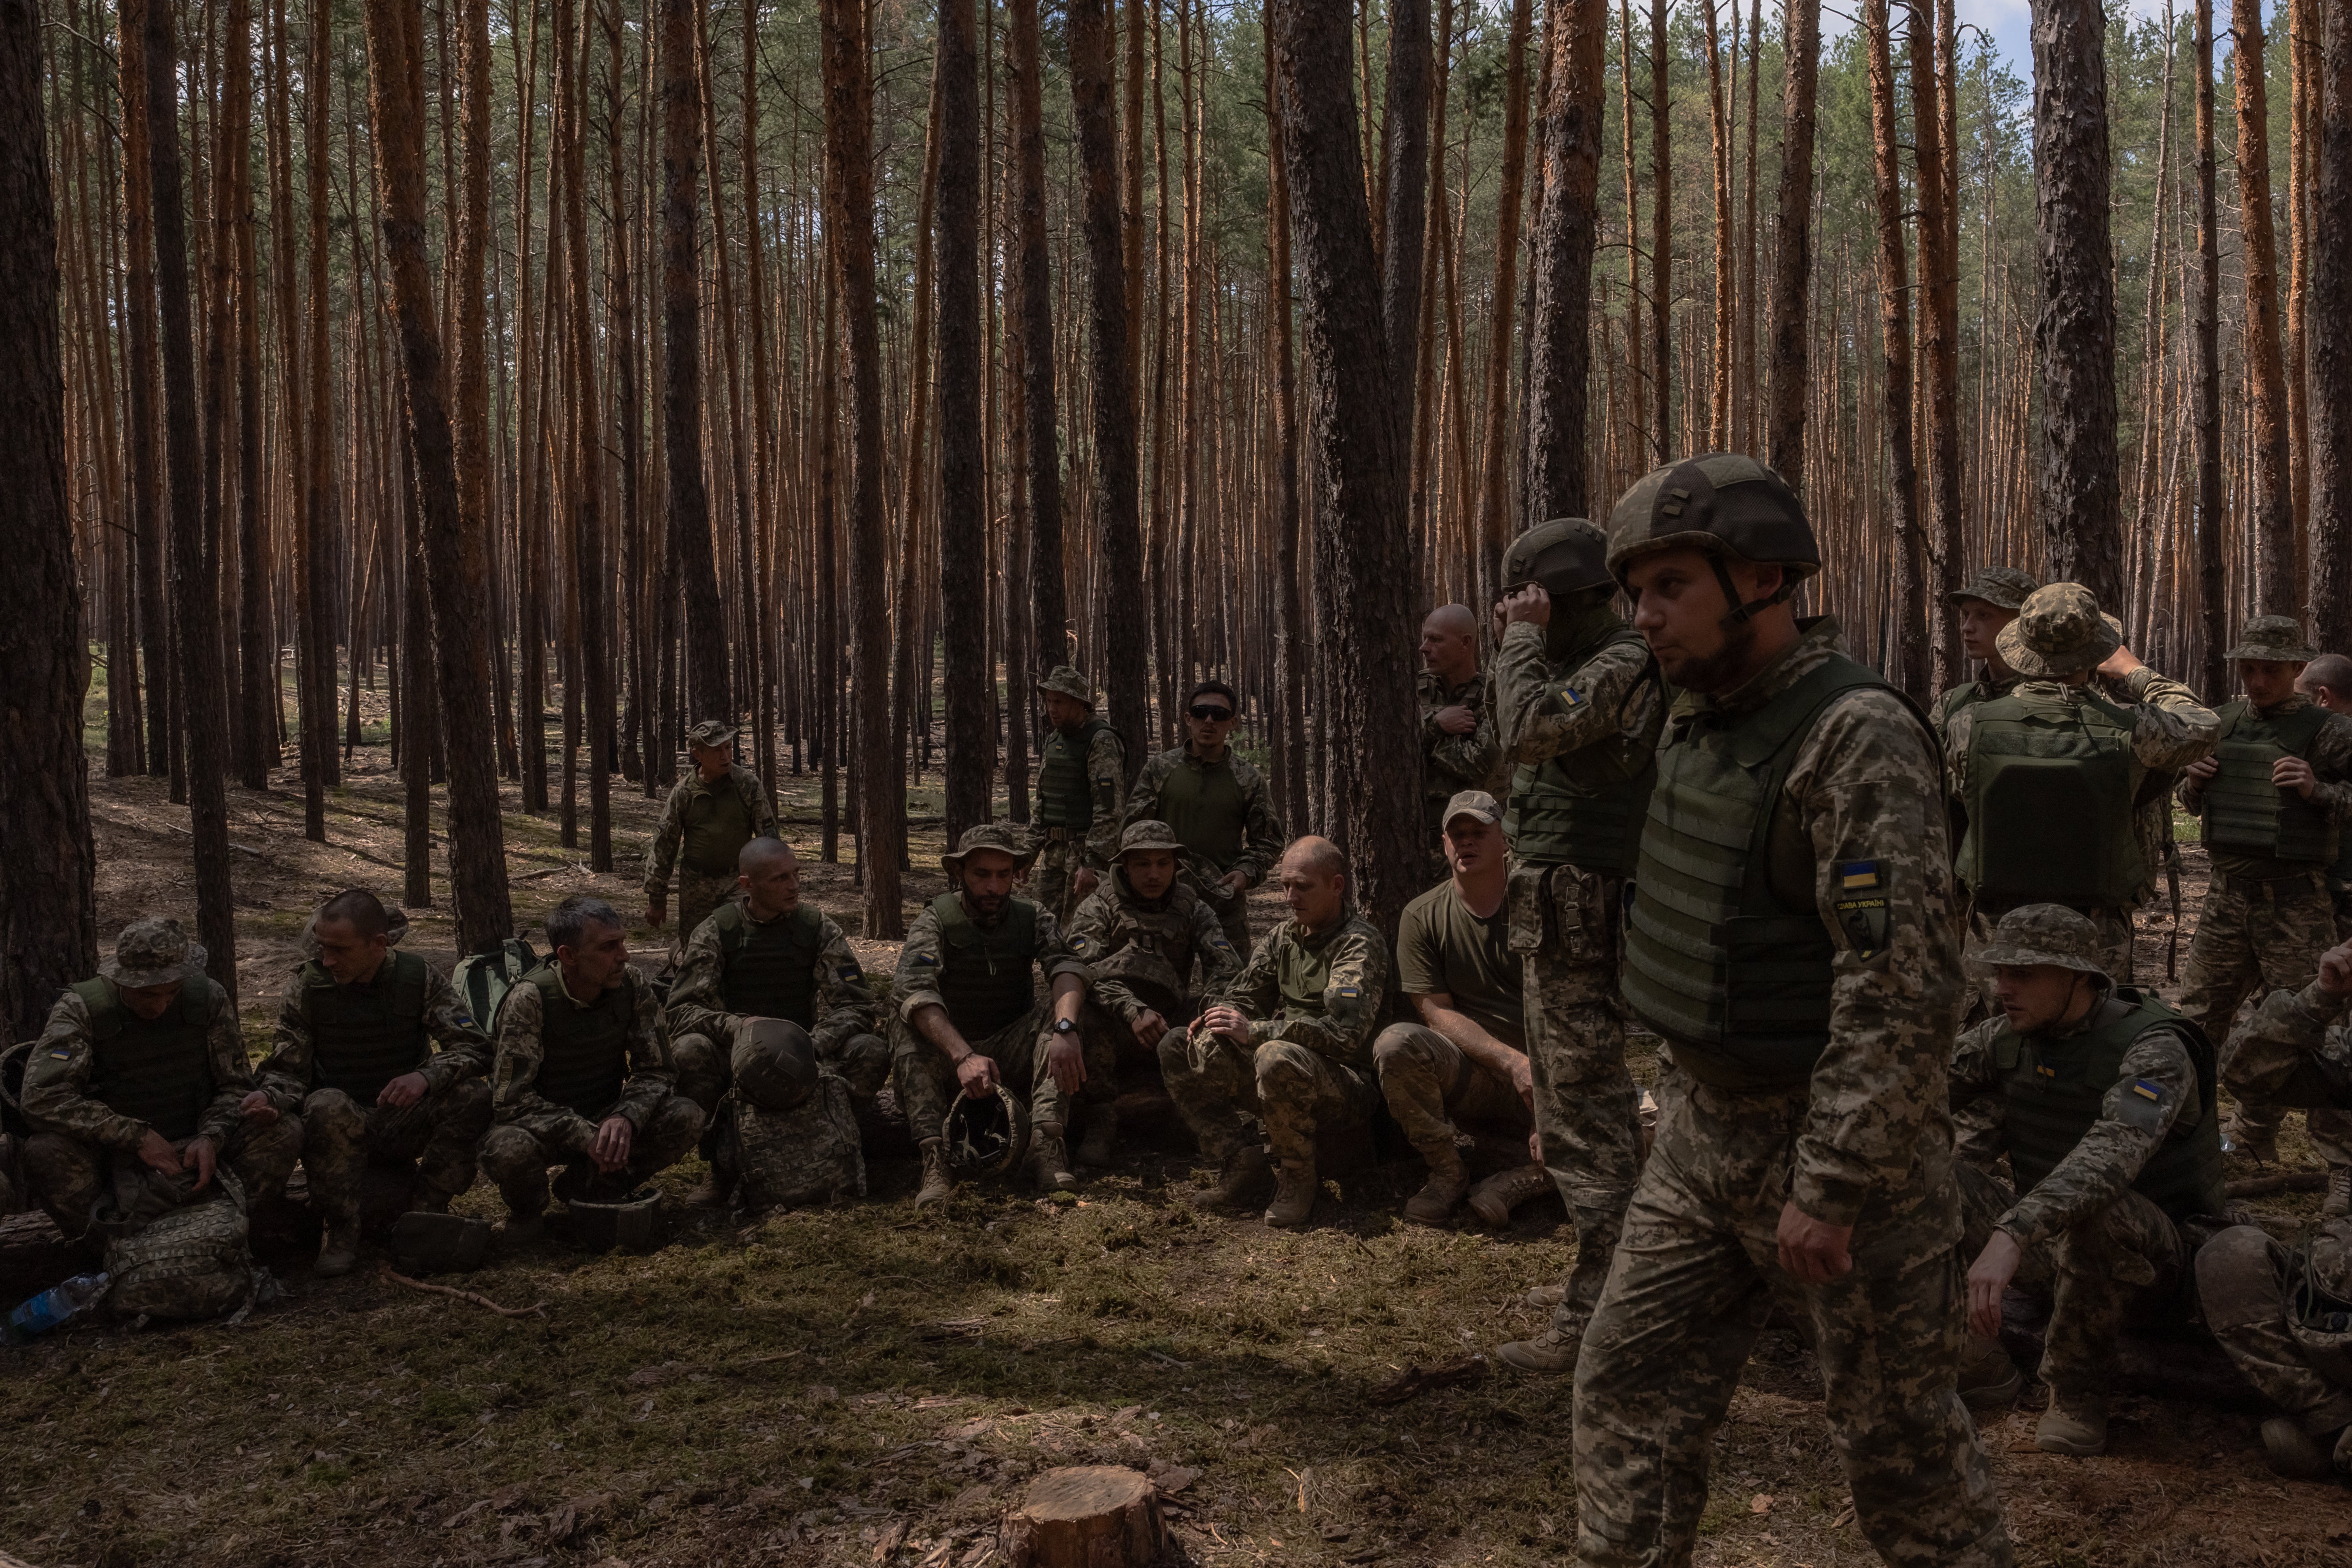 Ukrainian convicts attend a training session in Kharkiv